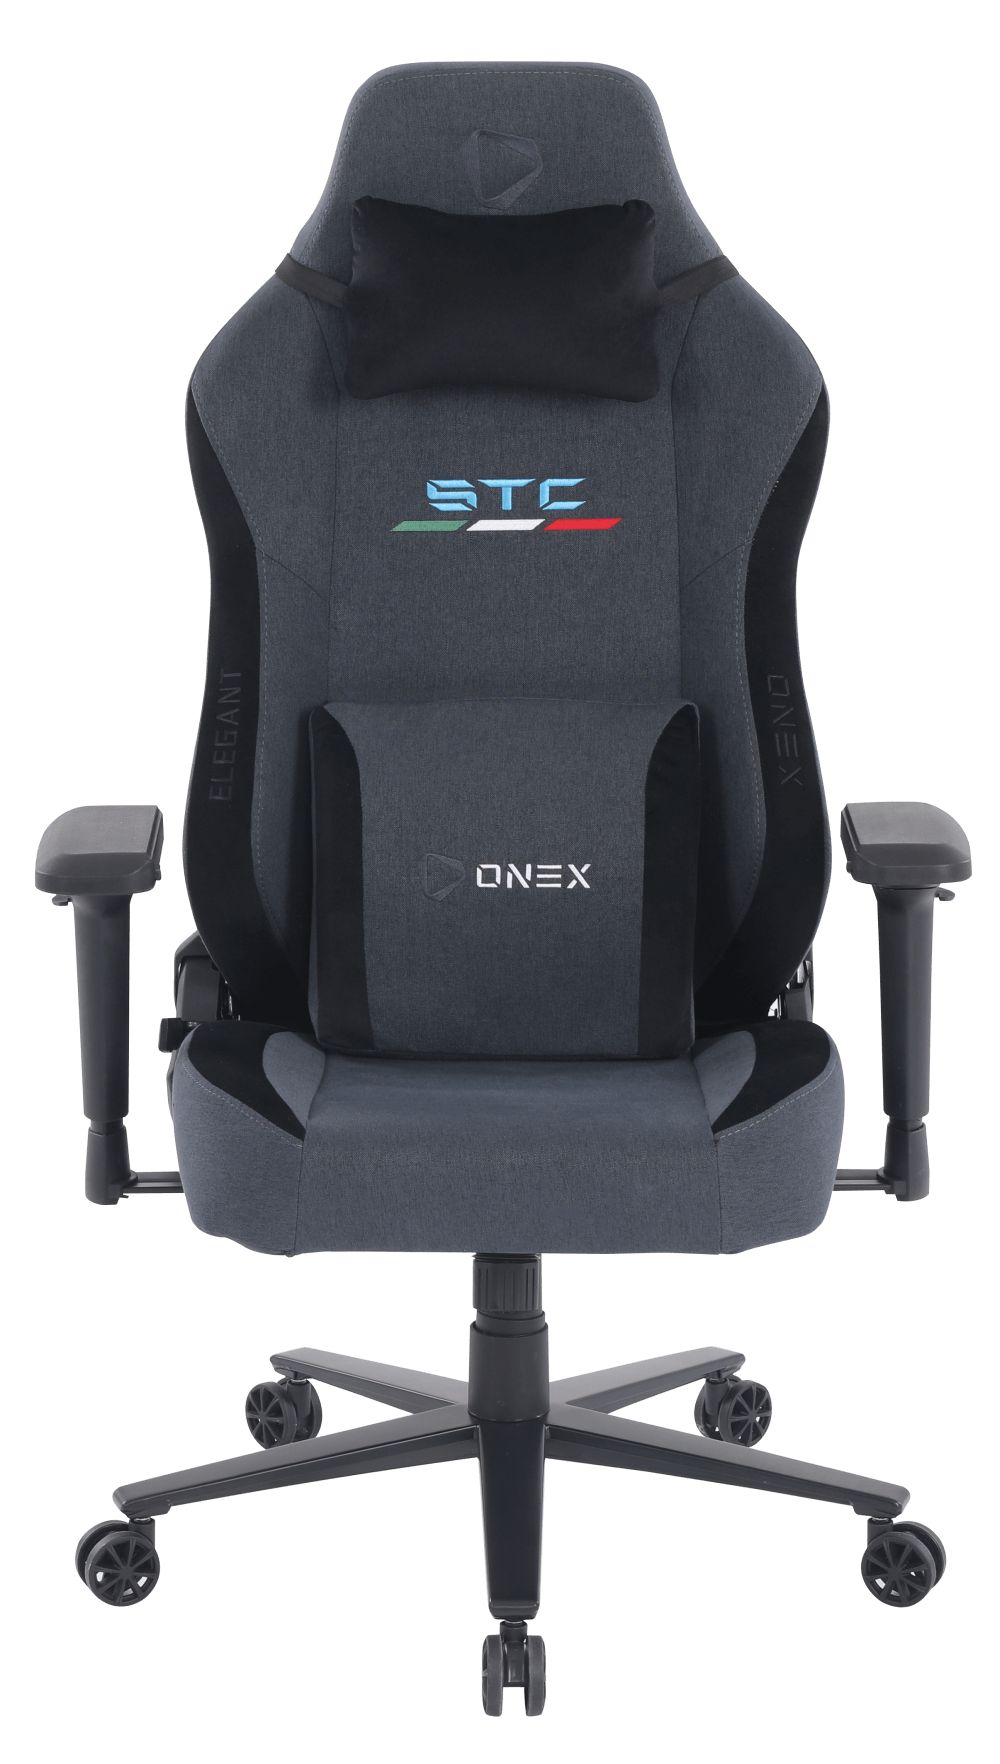  ONEX-STC ELEGANT Gaming /Office Chair - Graphite<BR><fONT COLOR='RED'>In-Store Pickup Not Available - Delivery Only (Freight Charges Apply)  